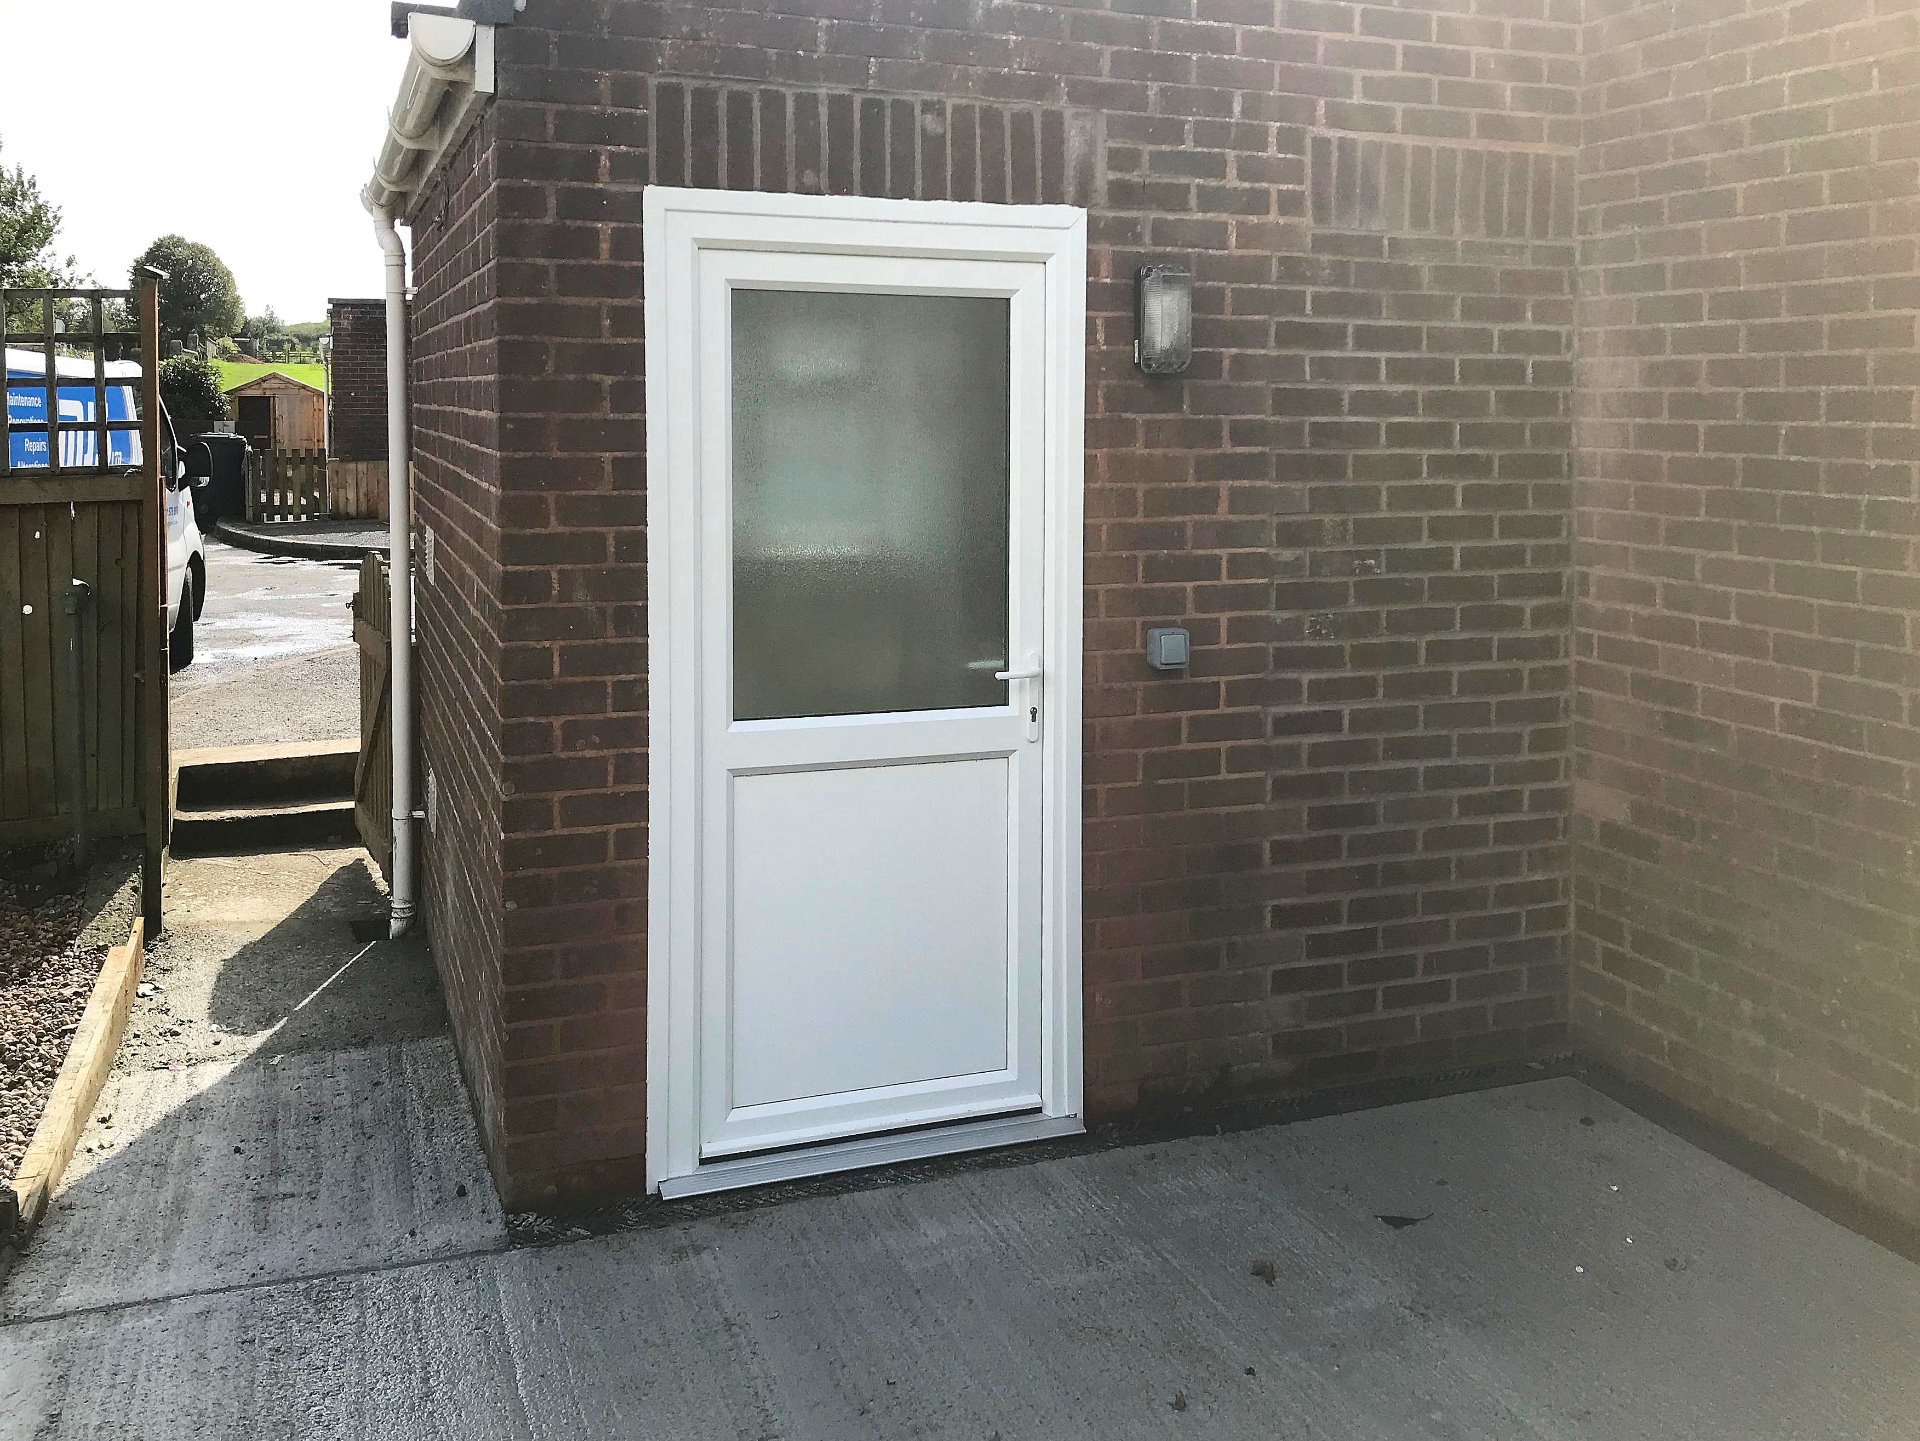 A new uPVC wide rear door in new position to access level outside disabled friendly space. North Devon